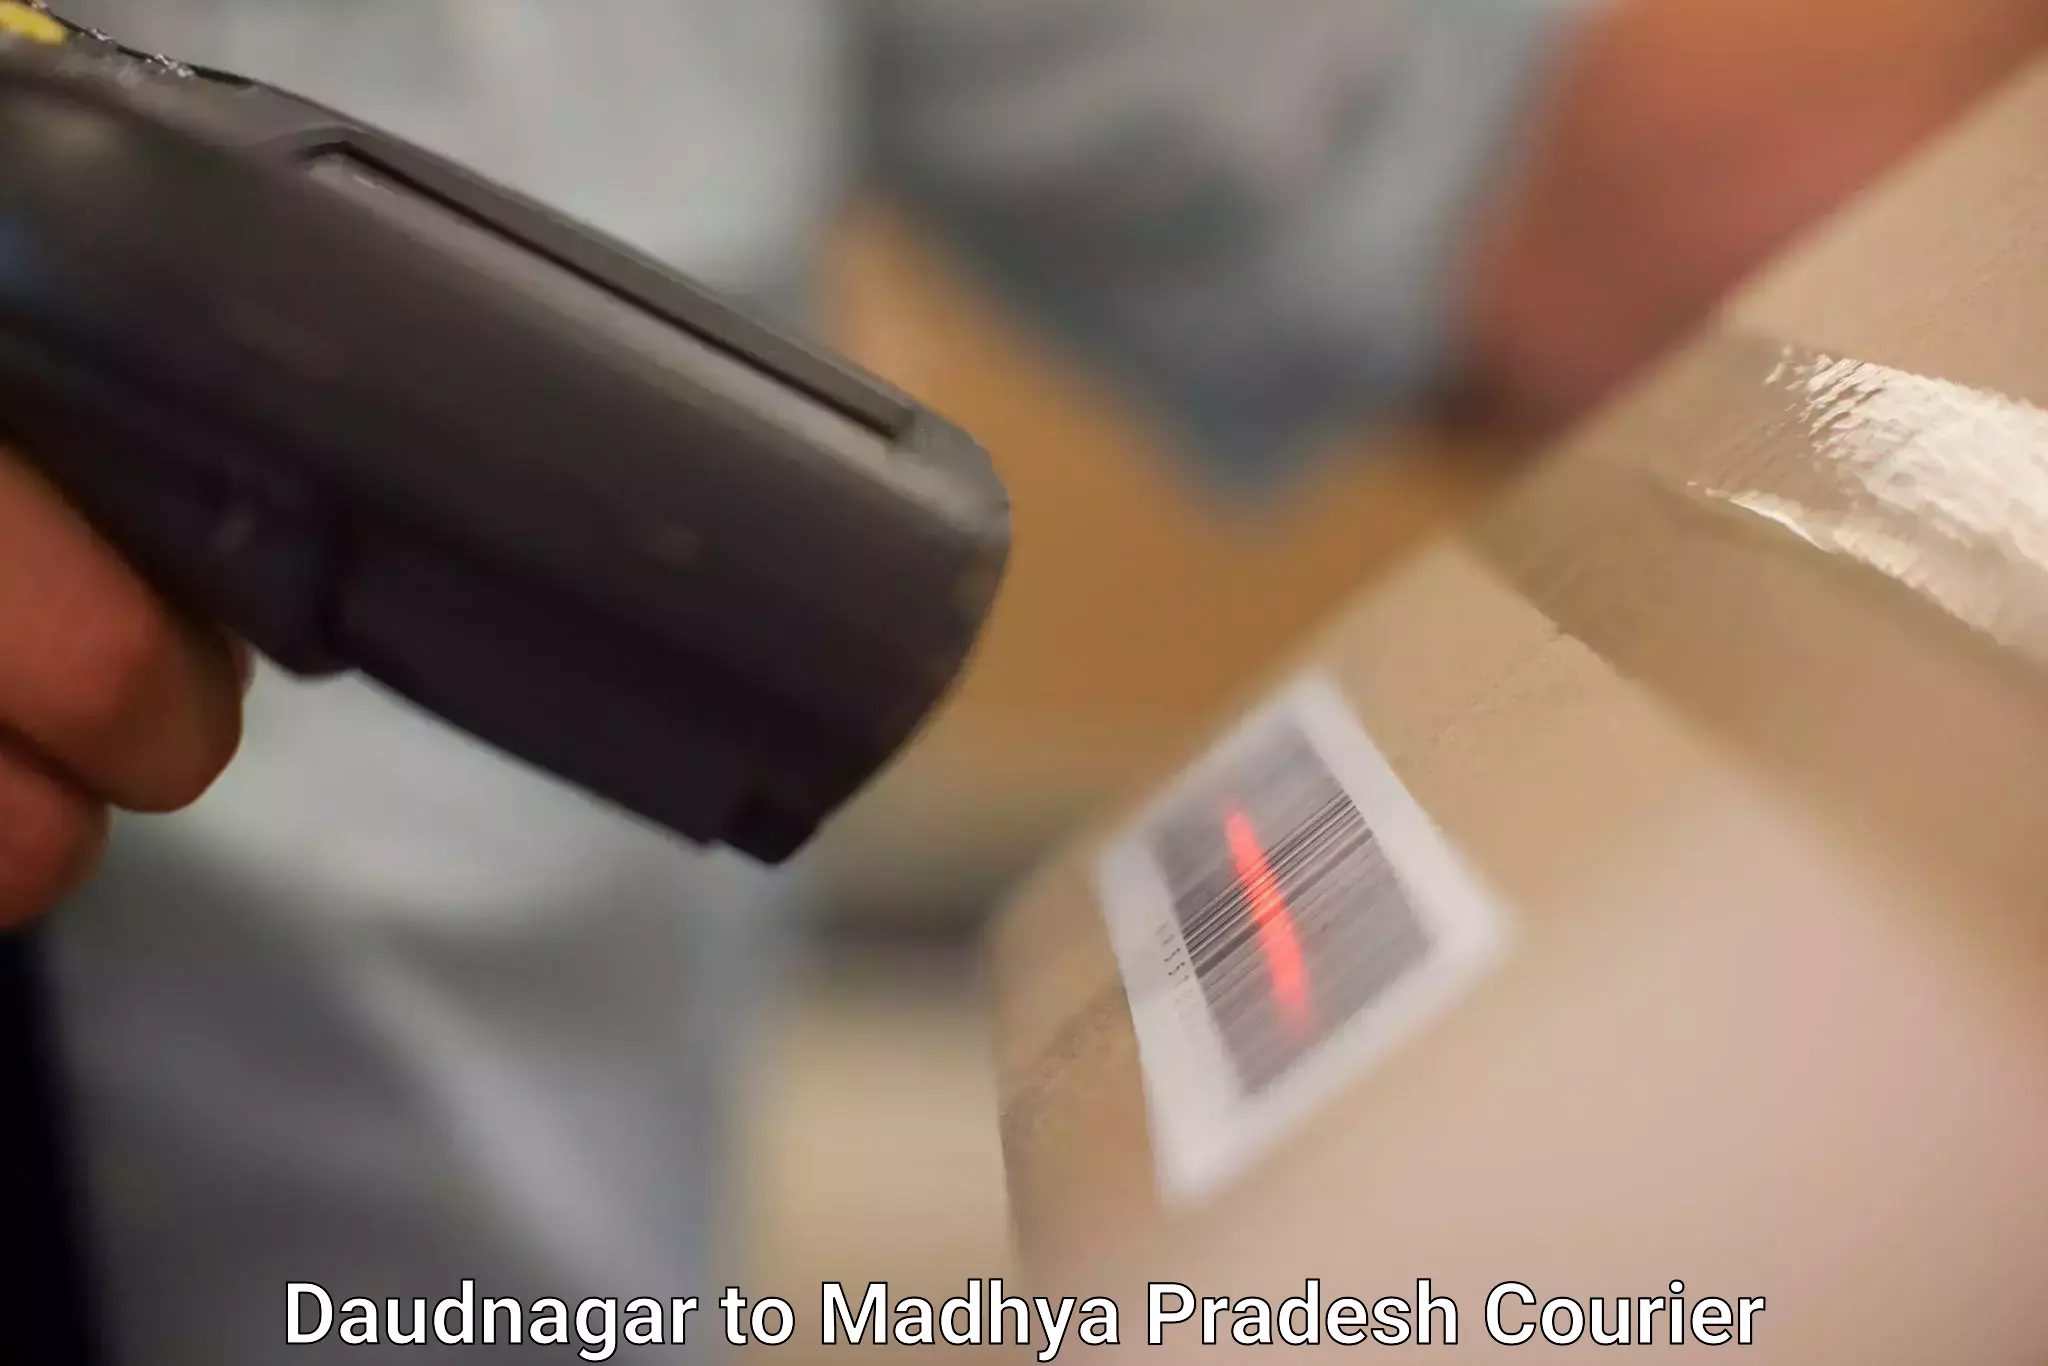 Subscription-based courier Daudnagar to Jawad Neemuch